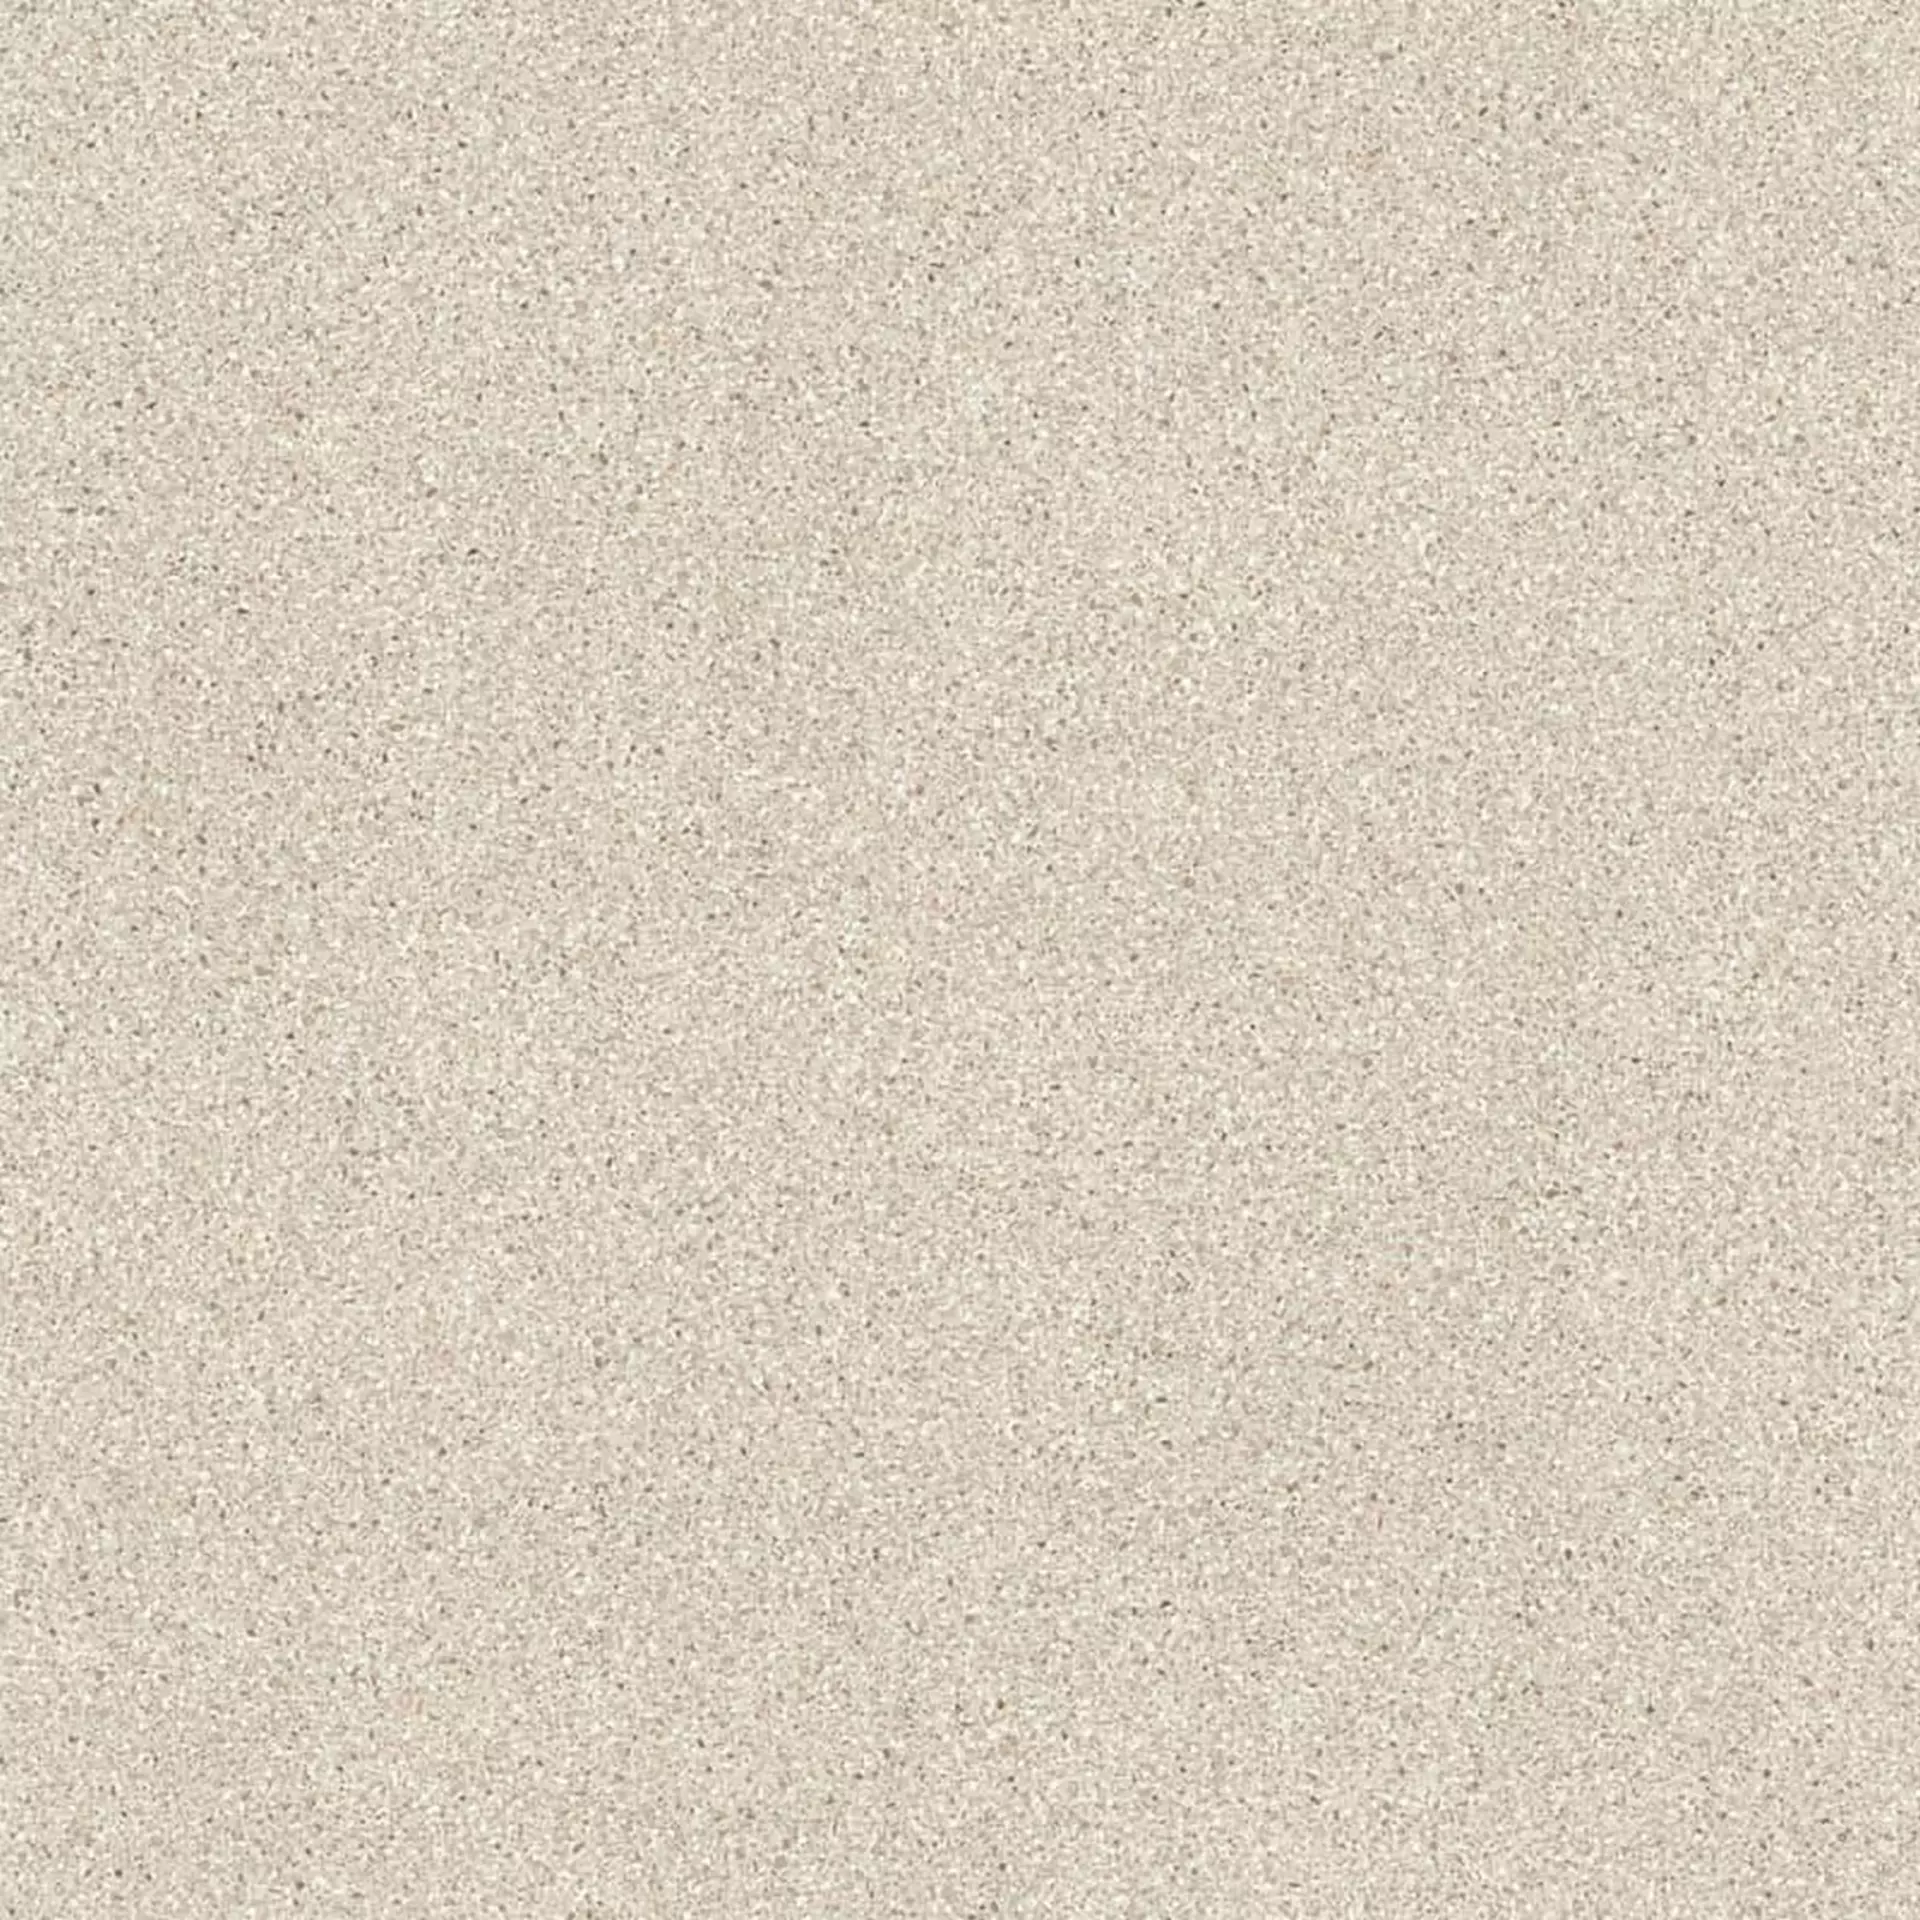 Sant Agostino Newdeco' Sand Natural CSANEDSN12 120x120cm rectified 10mm